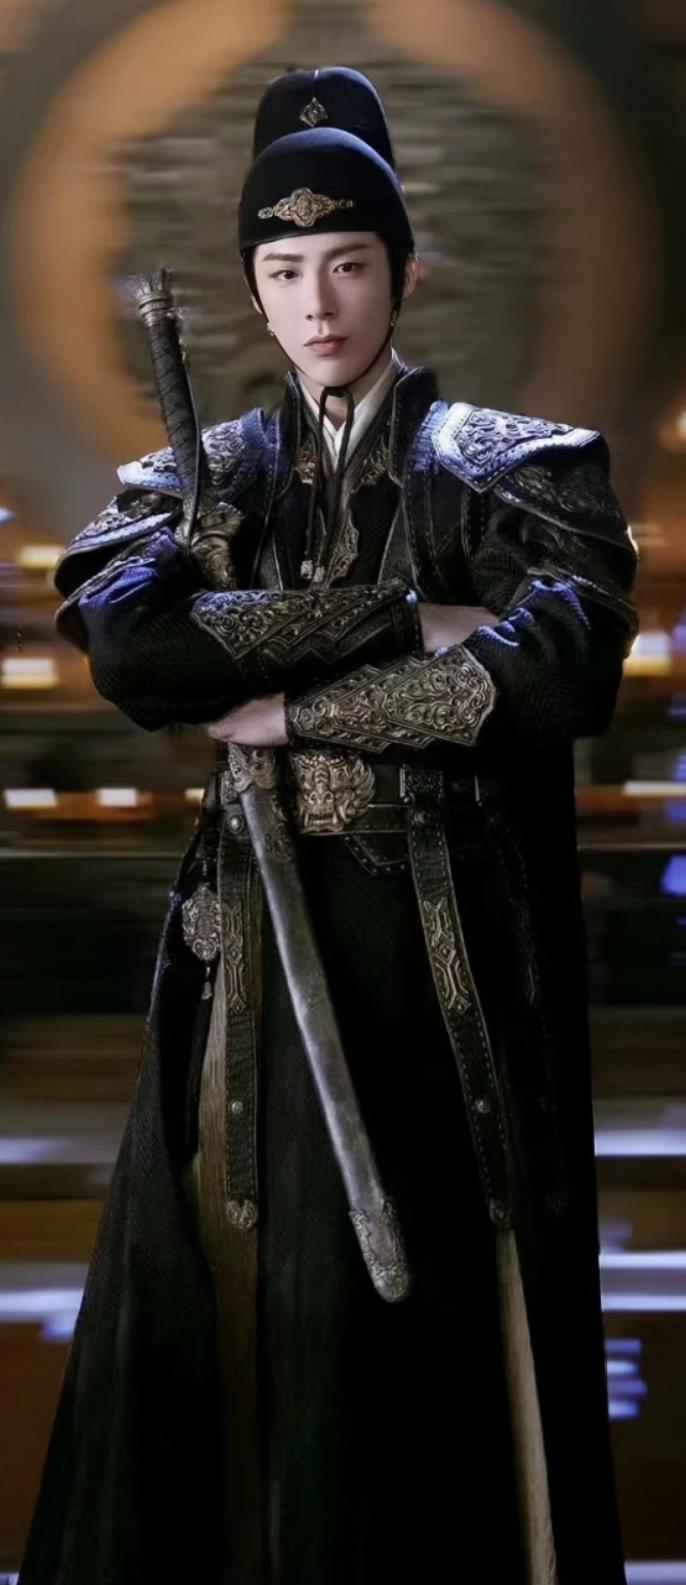 TV Series A Journey To Love Imperial Guard Ning Yuan Zhou Costume Ancient China Swordsman Leader Clothing